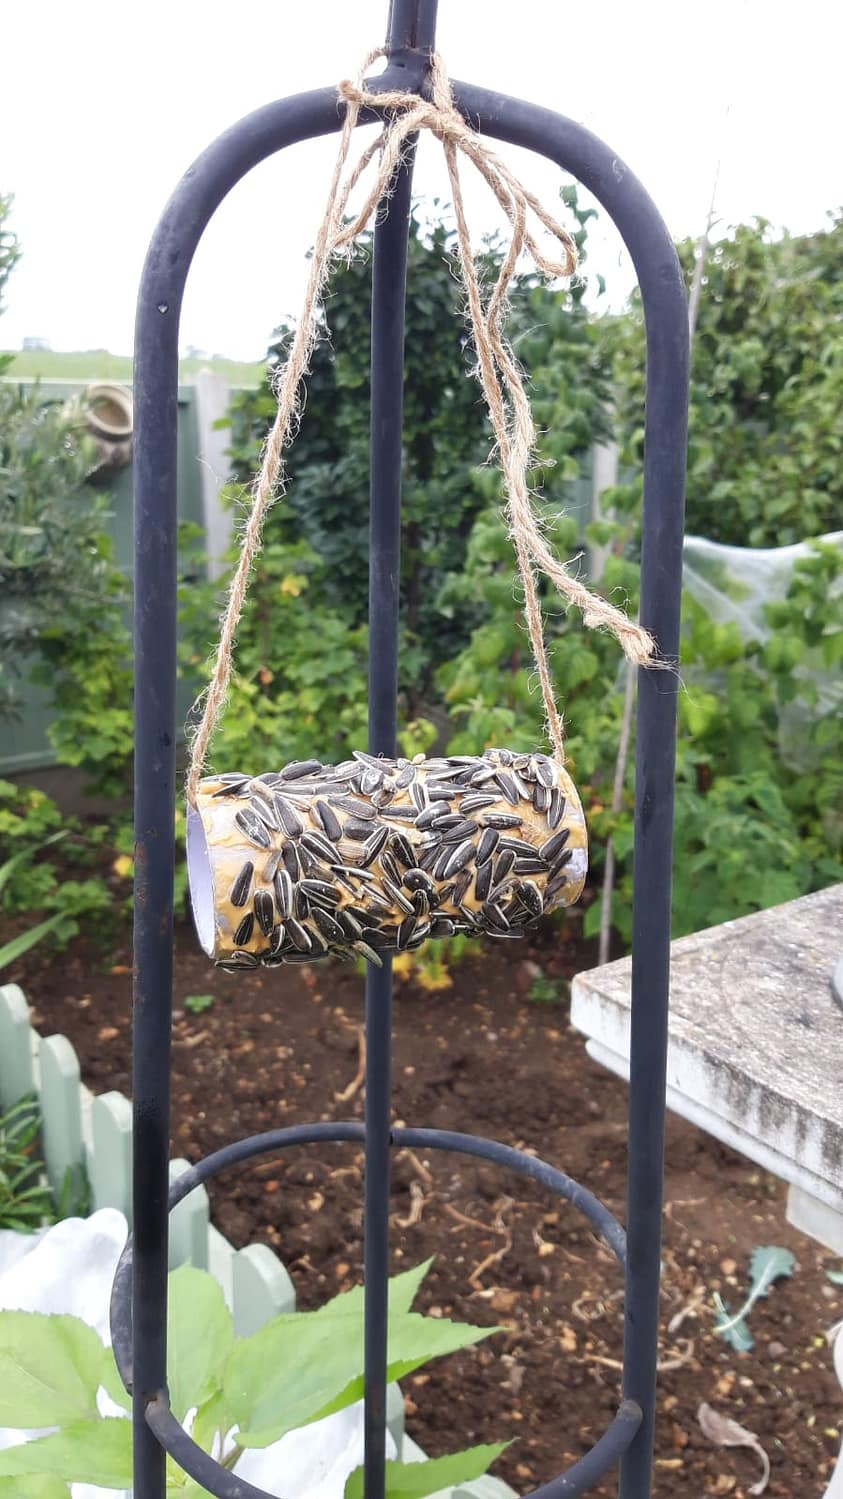 Bird feeder made from common house hold objects